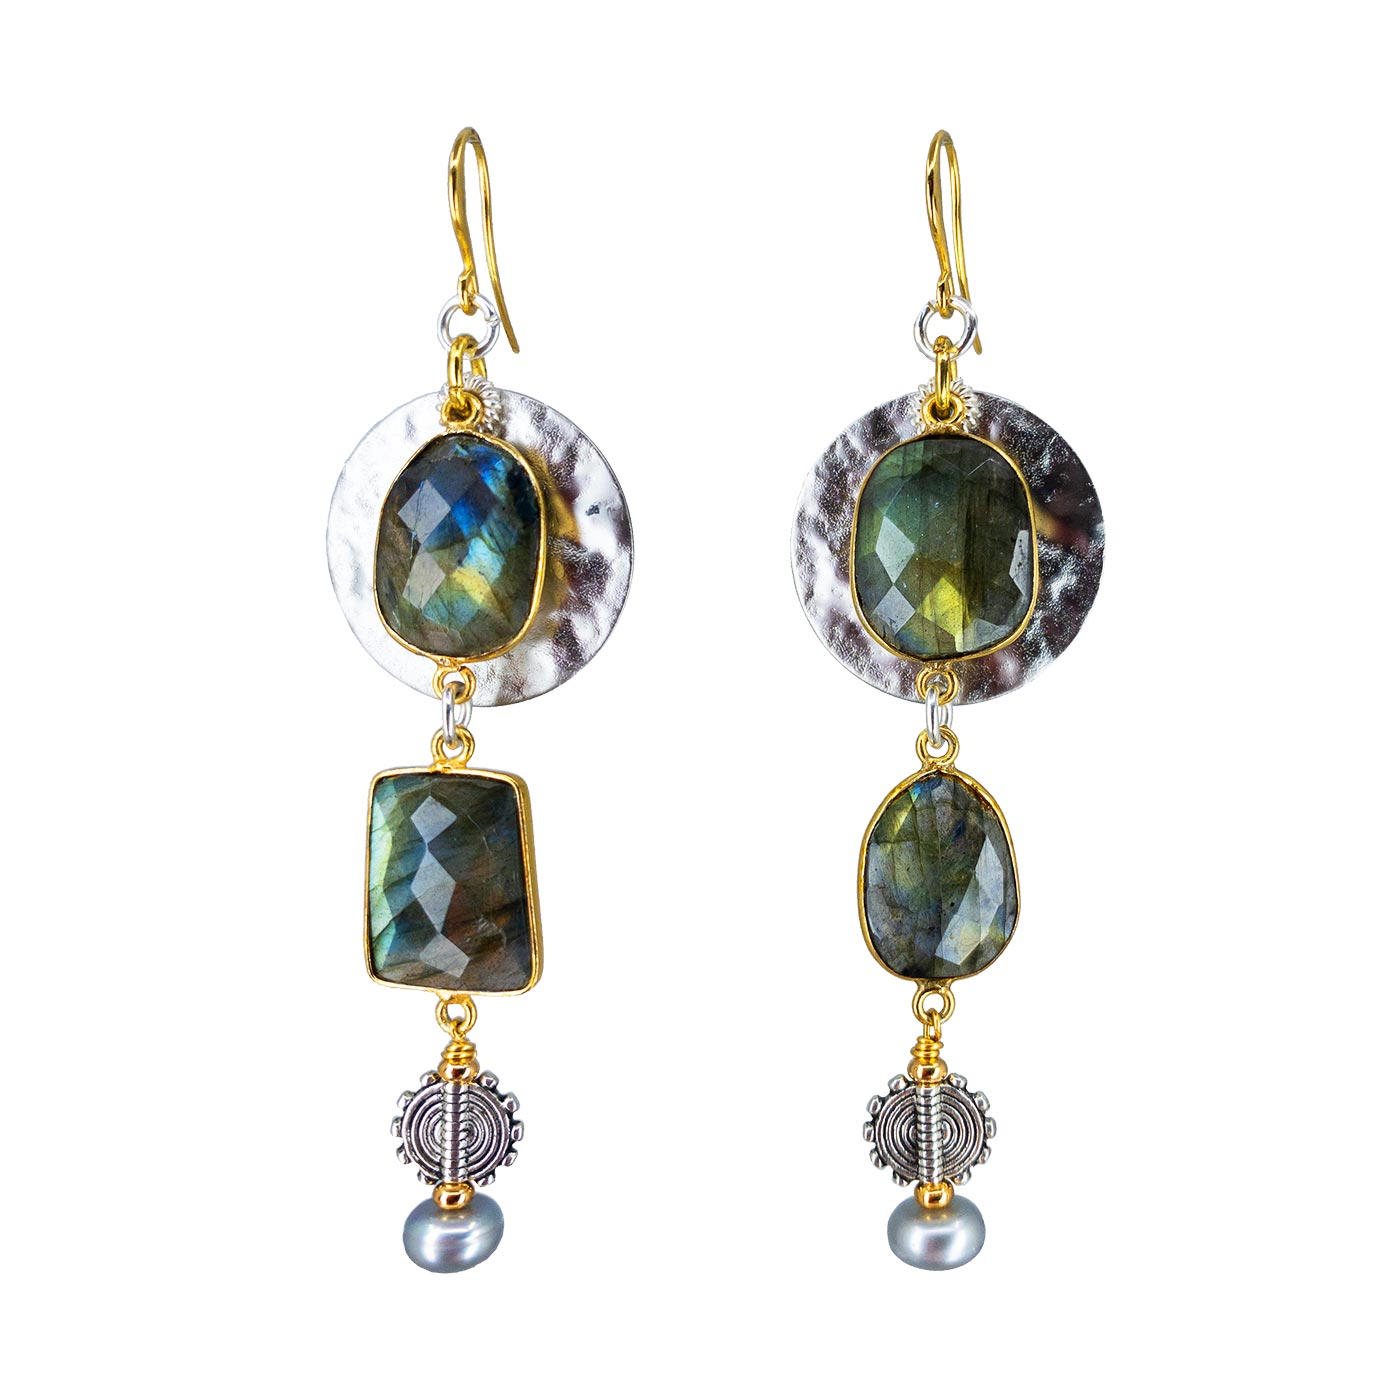 N°919 The Labradorite God of Small Shiny Things Statement Earrings